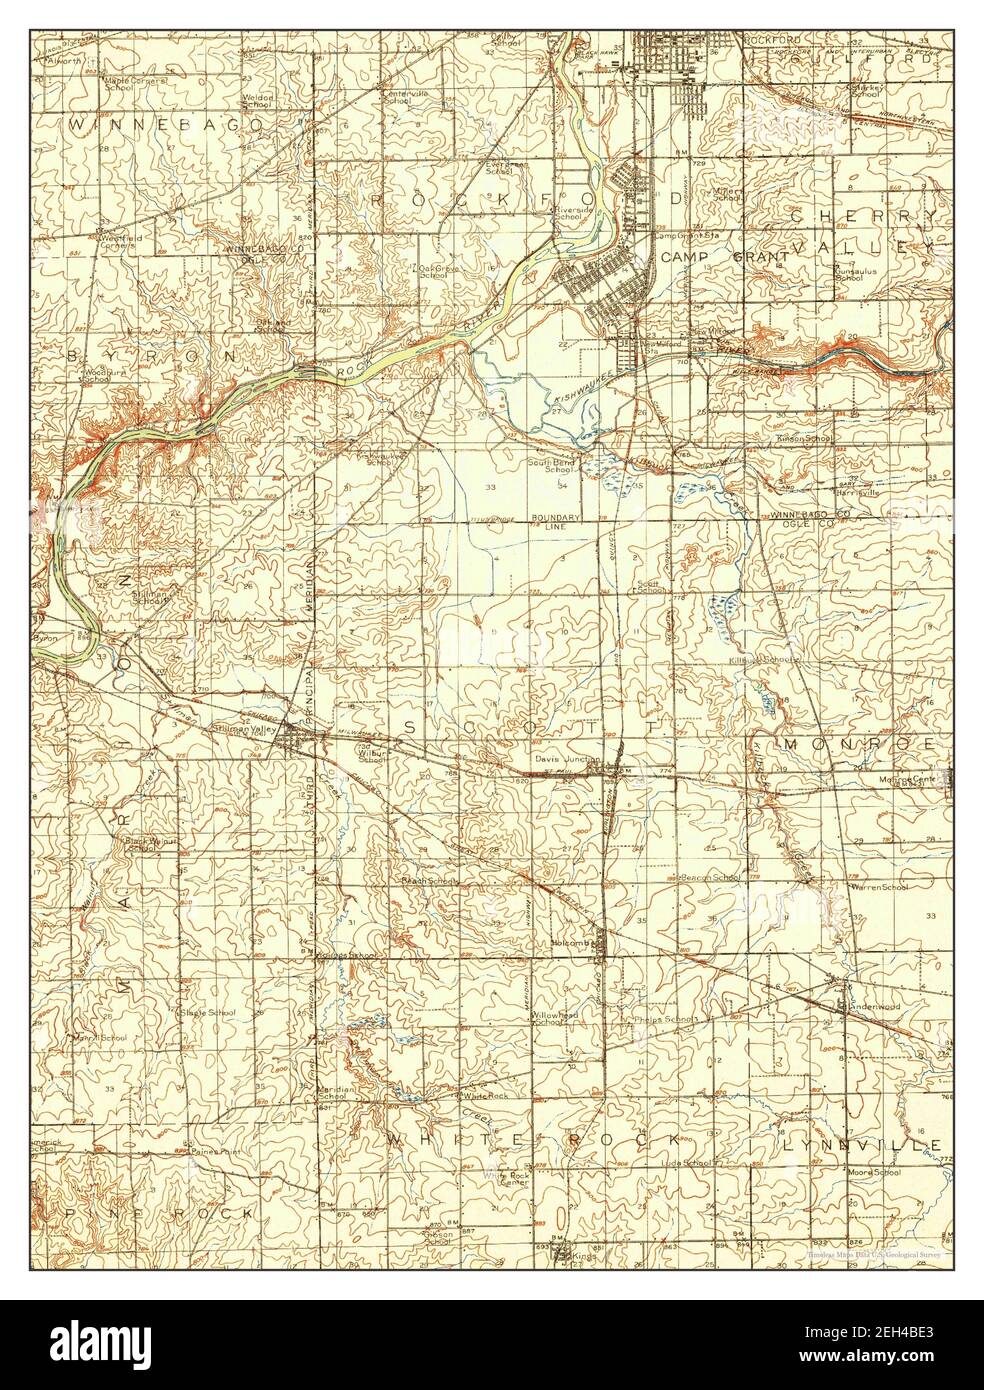 Kings, Illinois, map 1918, 1:62500, United States of America by Timeless Maps, data U.S. Geological Survey Stock Photo